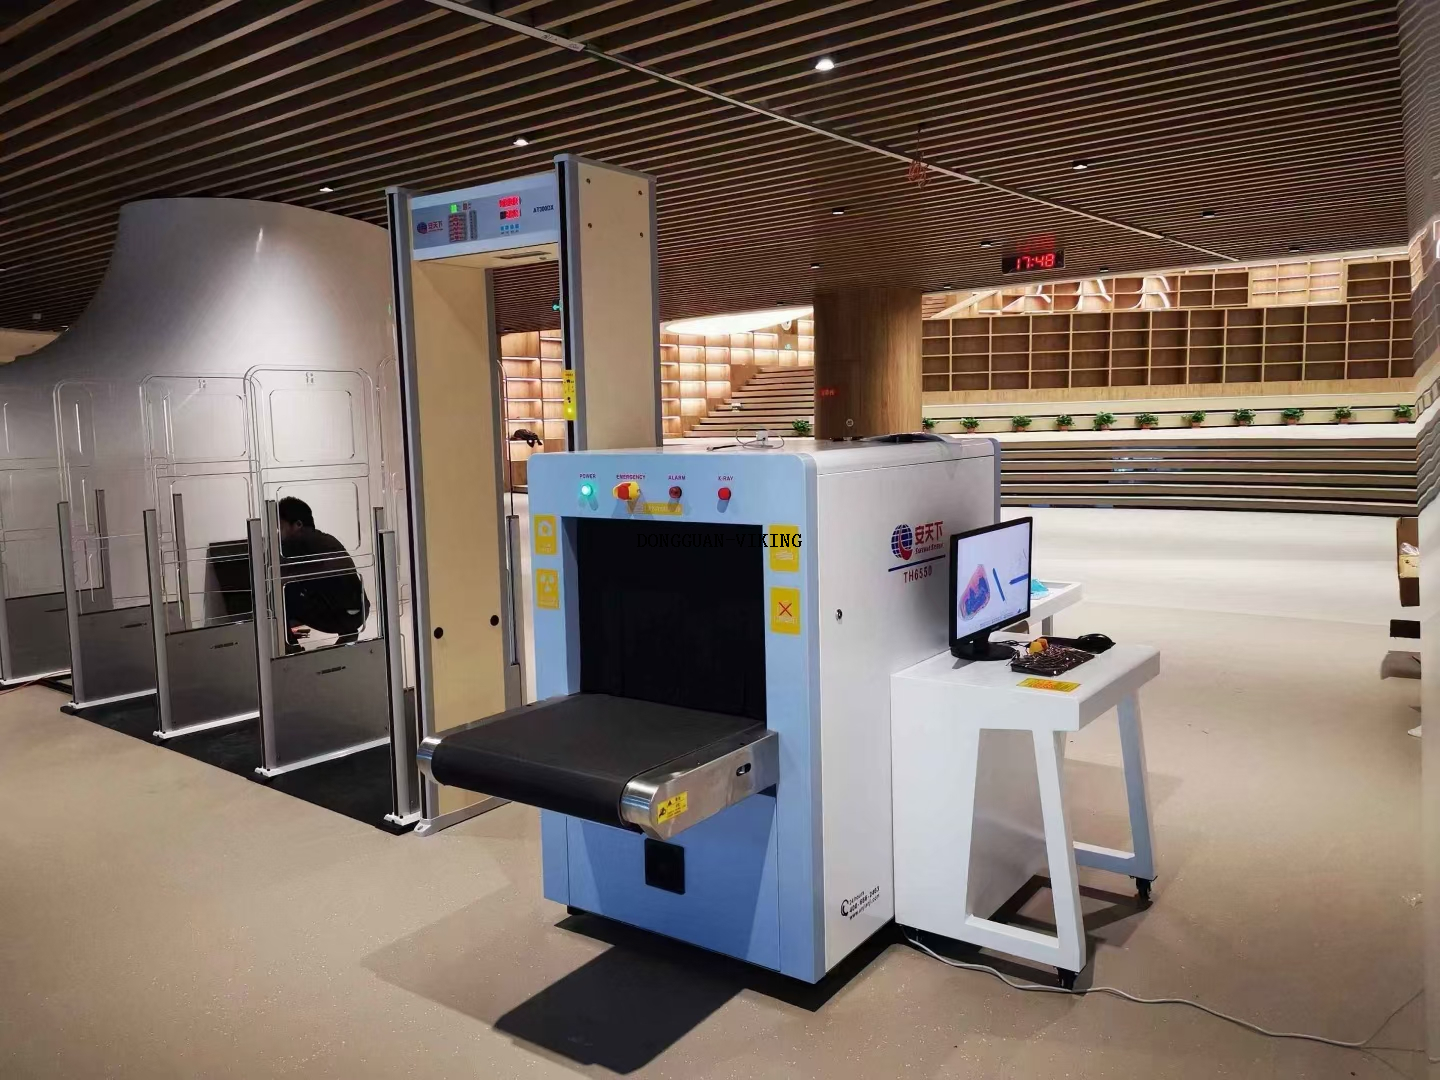 Security X-ray Airport Security Baggage and Parcel Inspection Scanner machine 